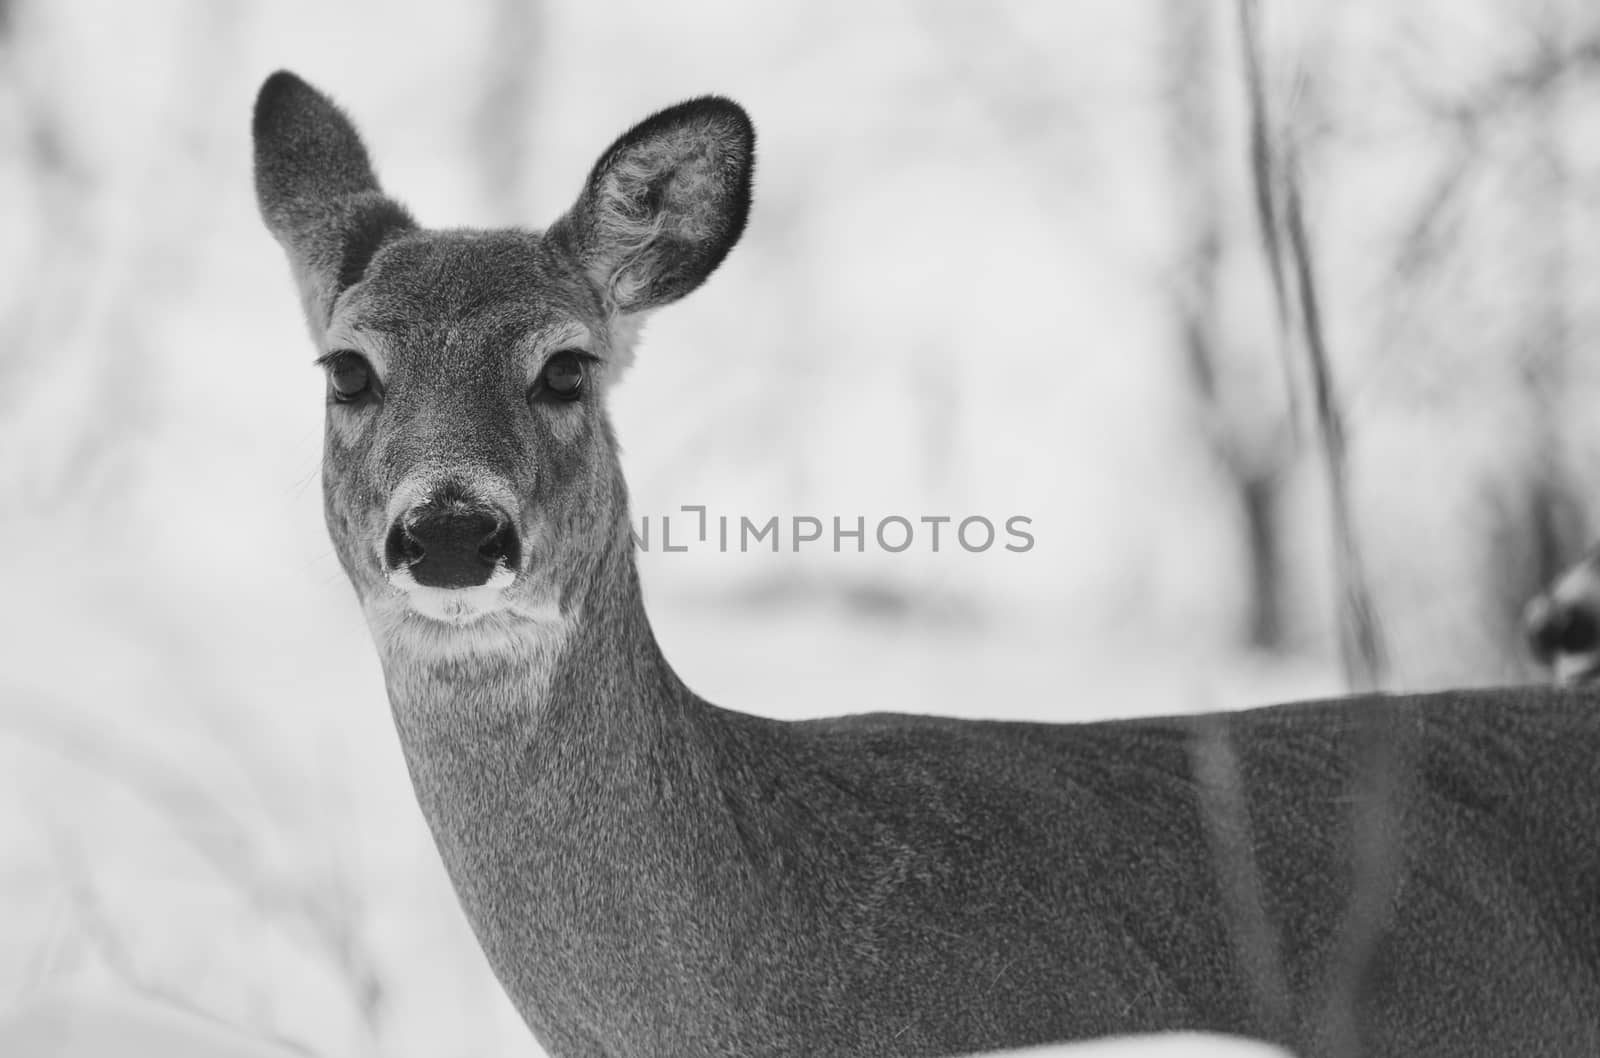 Beautiful black and white picture with a wild deer in the snowy forest by teo